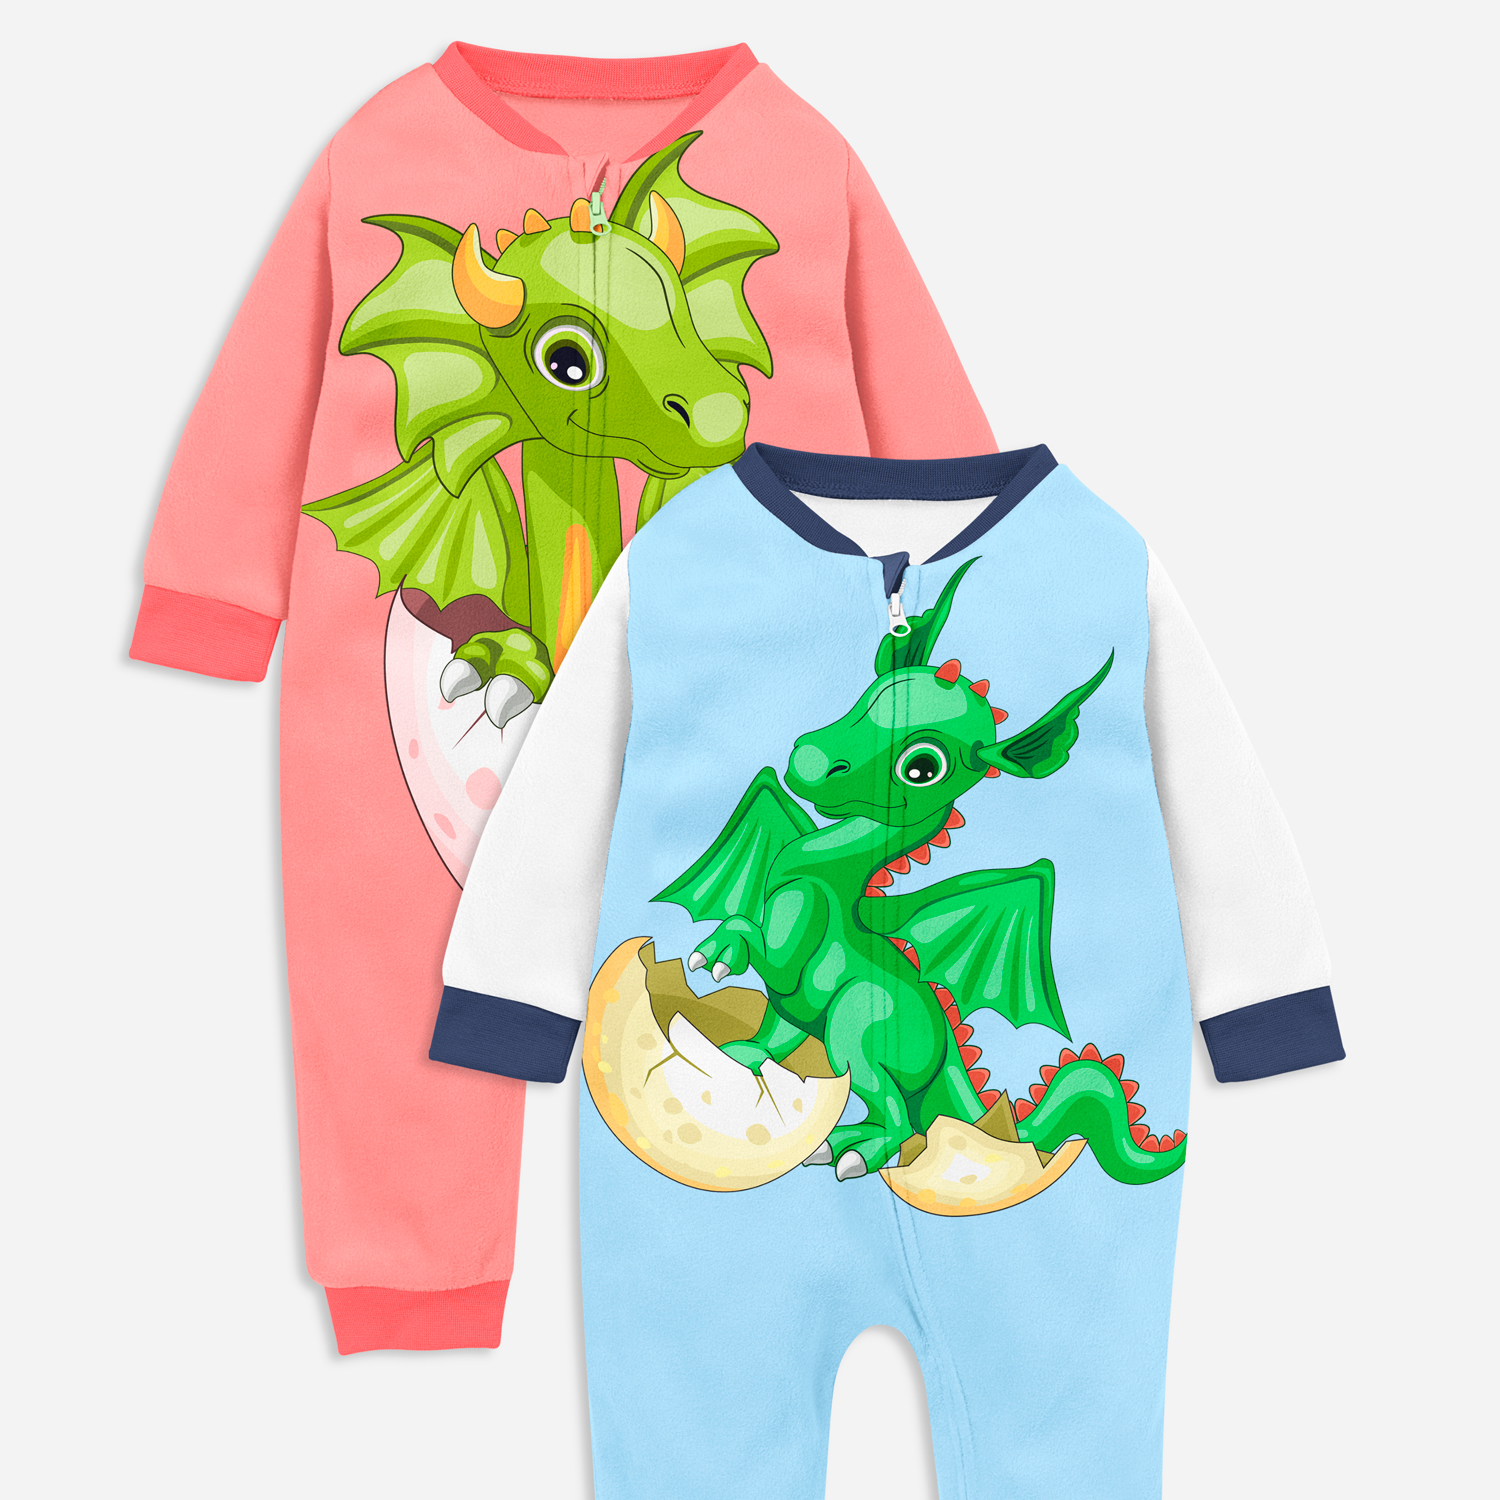 Children's costumes with the image of little dragons.